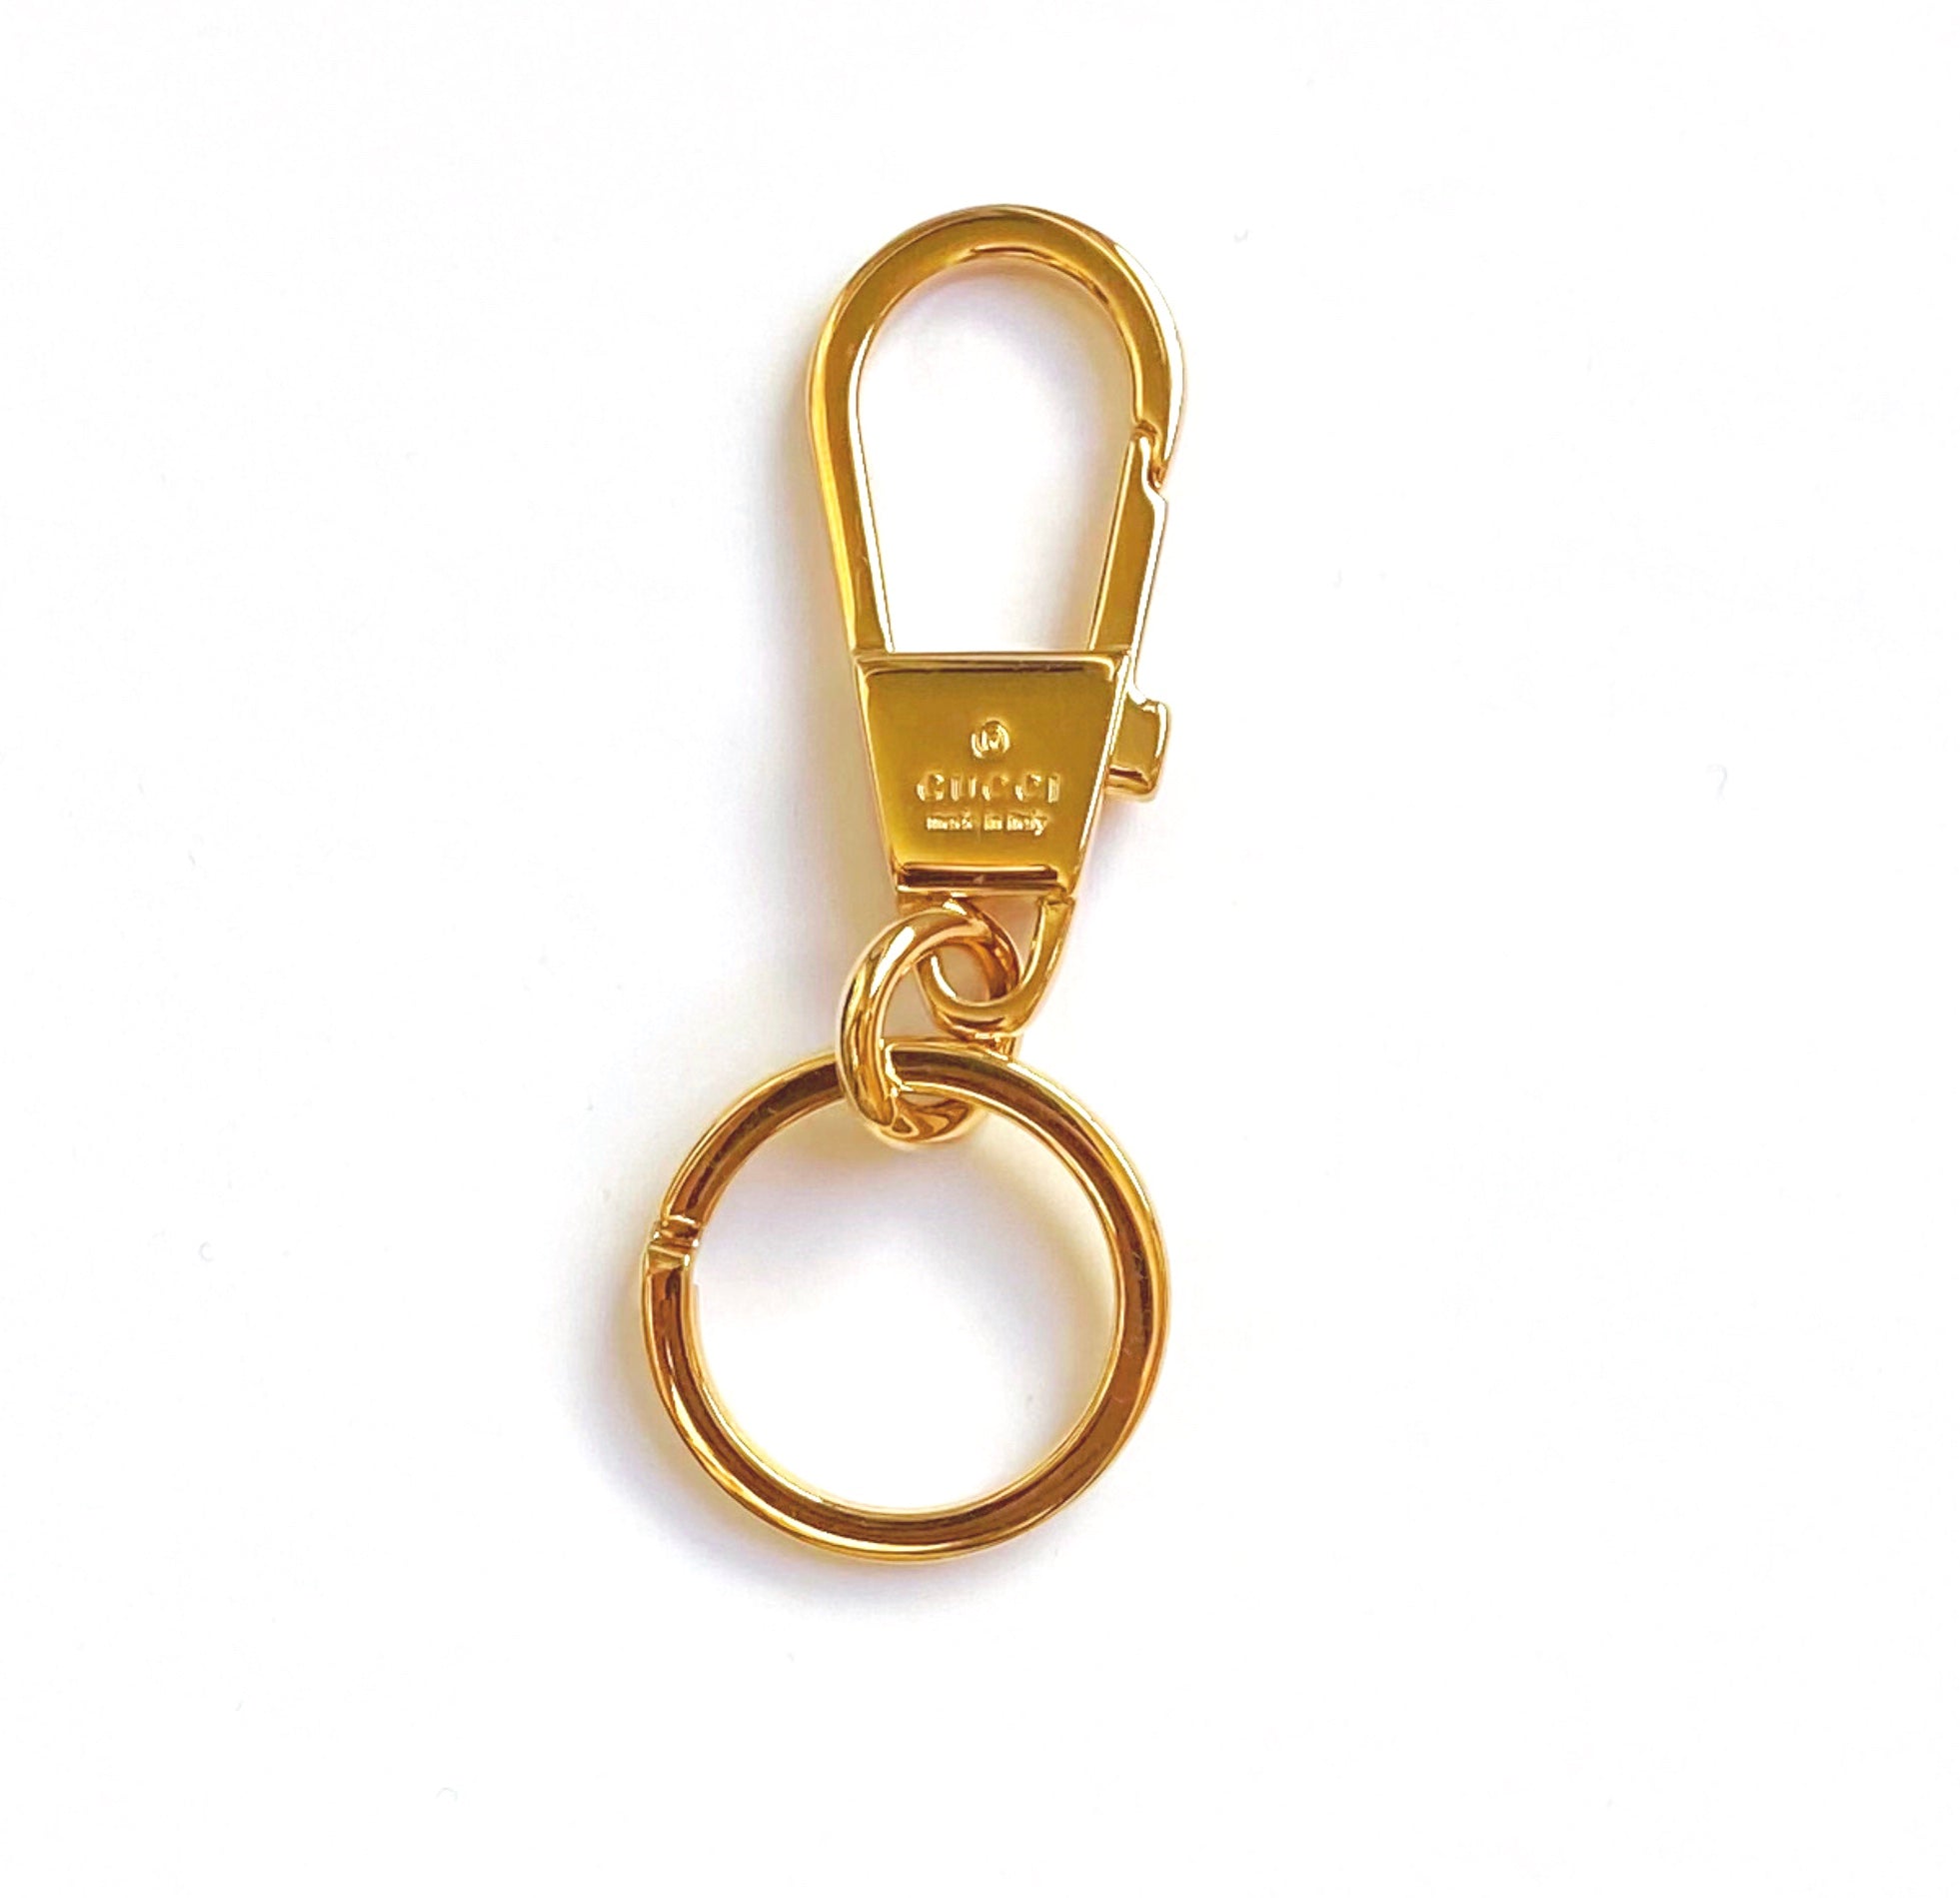 100% Authentic Shiny Gold Gucci Keychain – Old Soul Vintage Jewelry